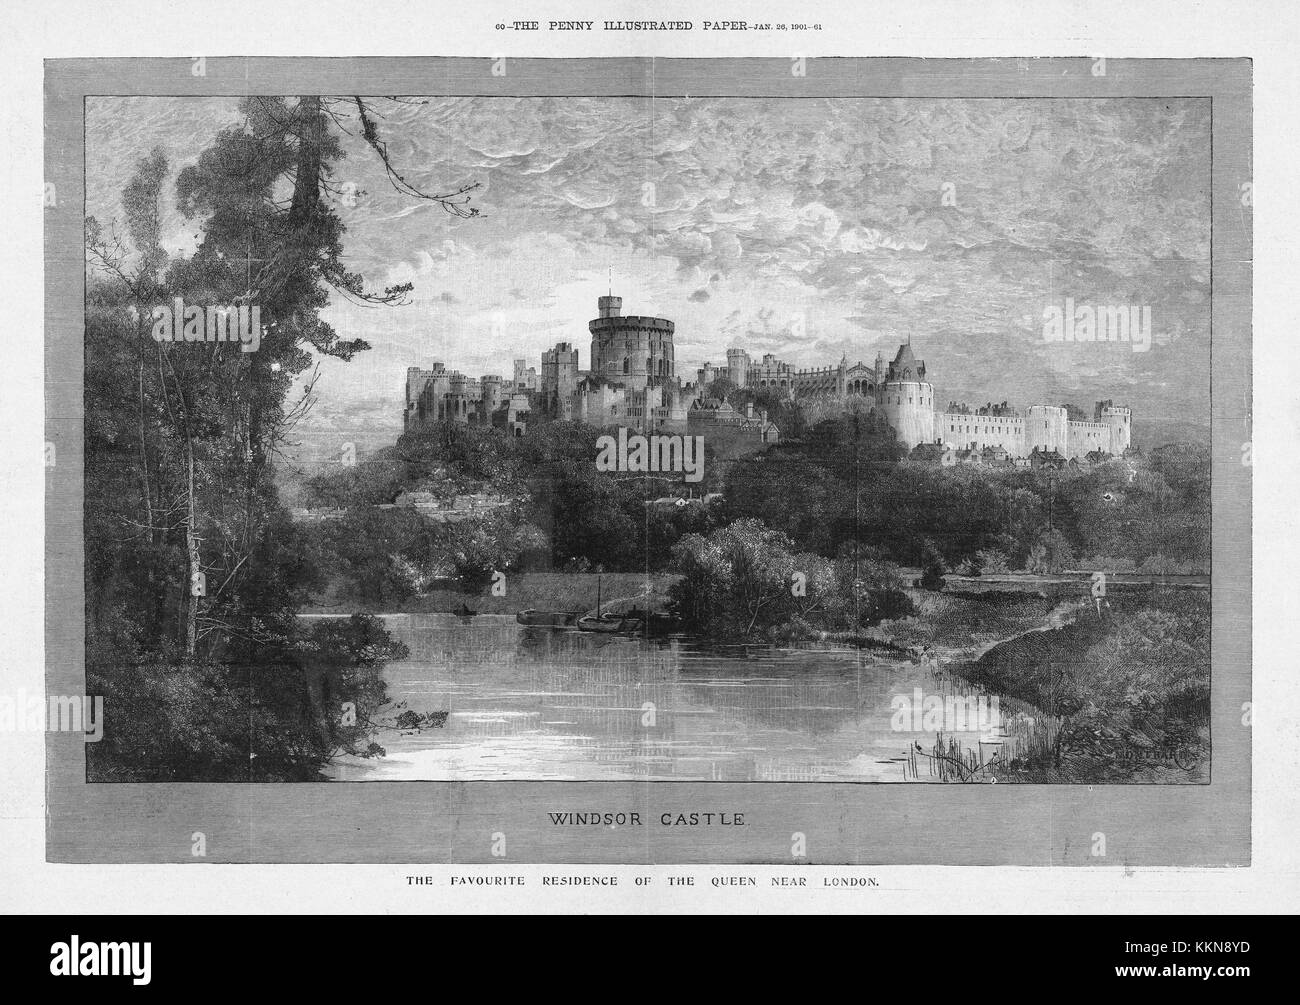 1901 Penny Illustrated Paper Windsor Castle, Queen Victoria's Favourite Residence Stock Photo